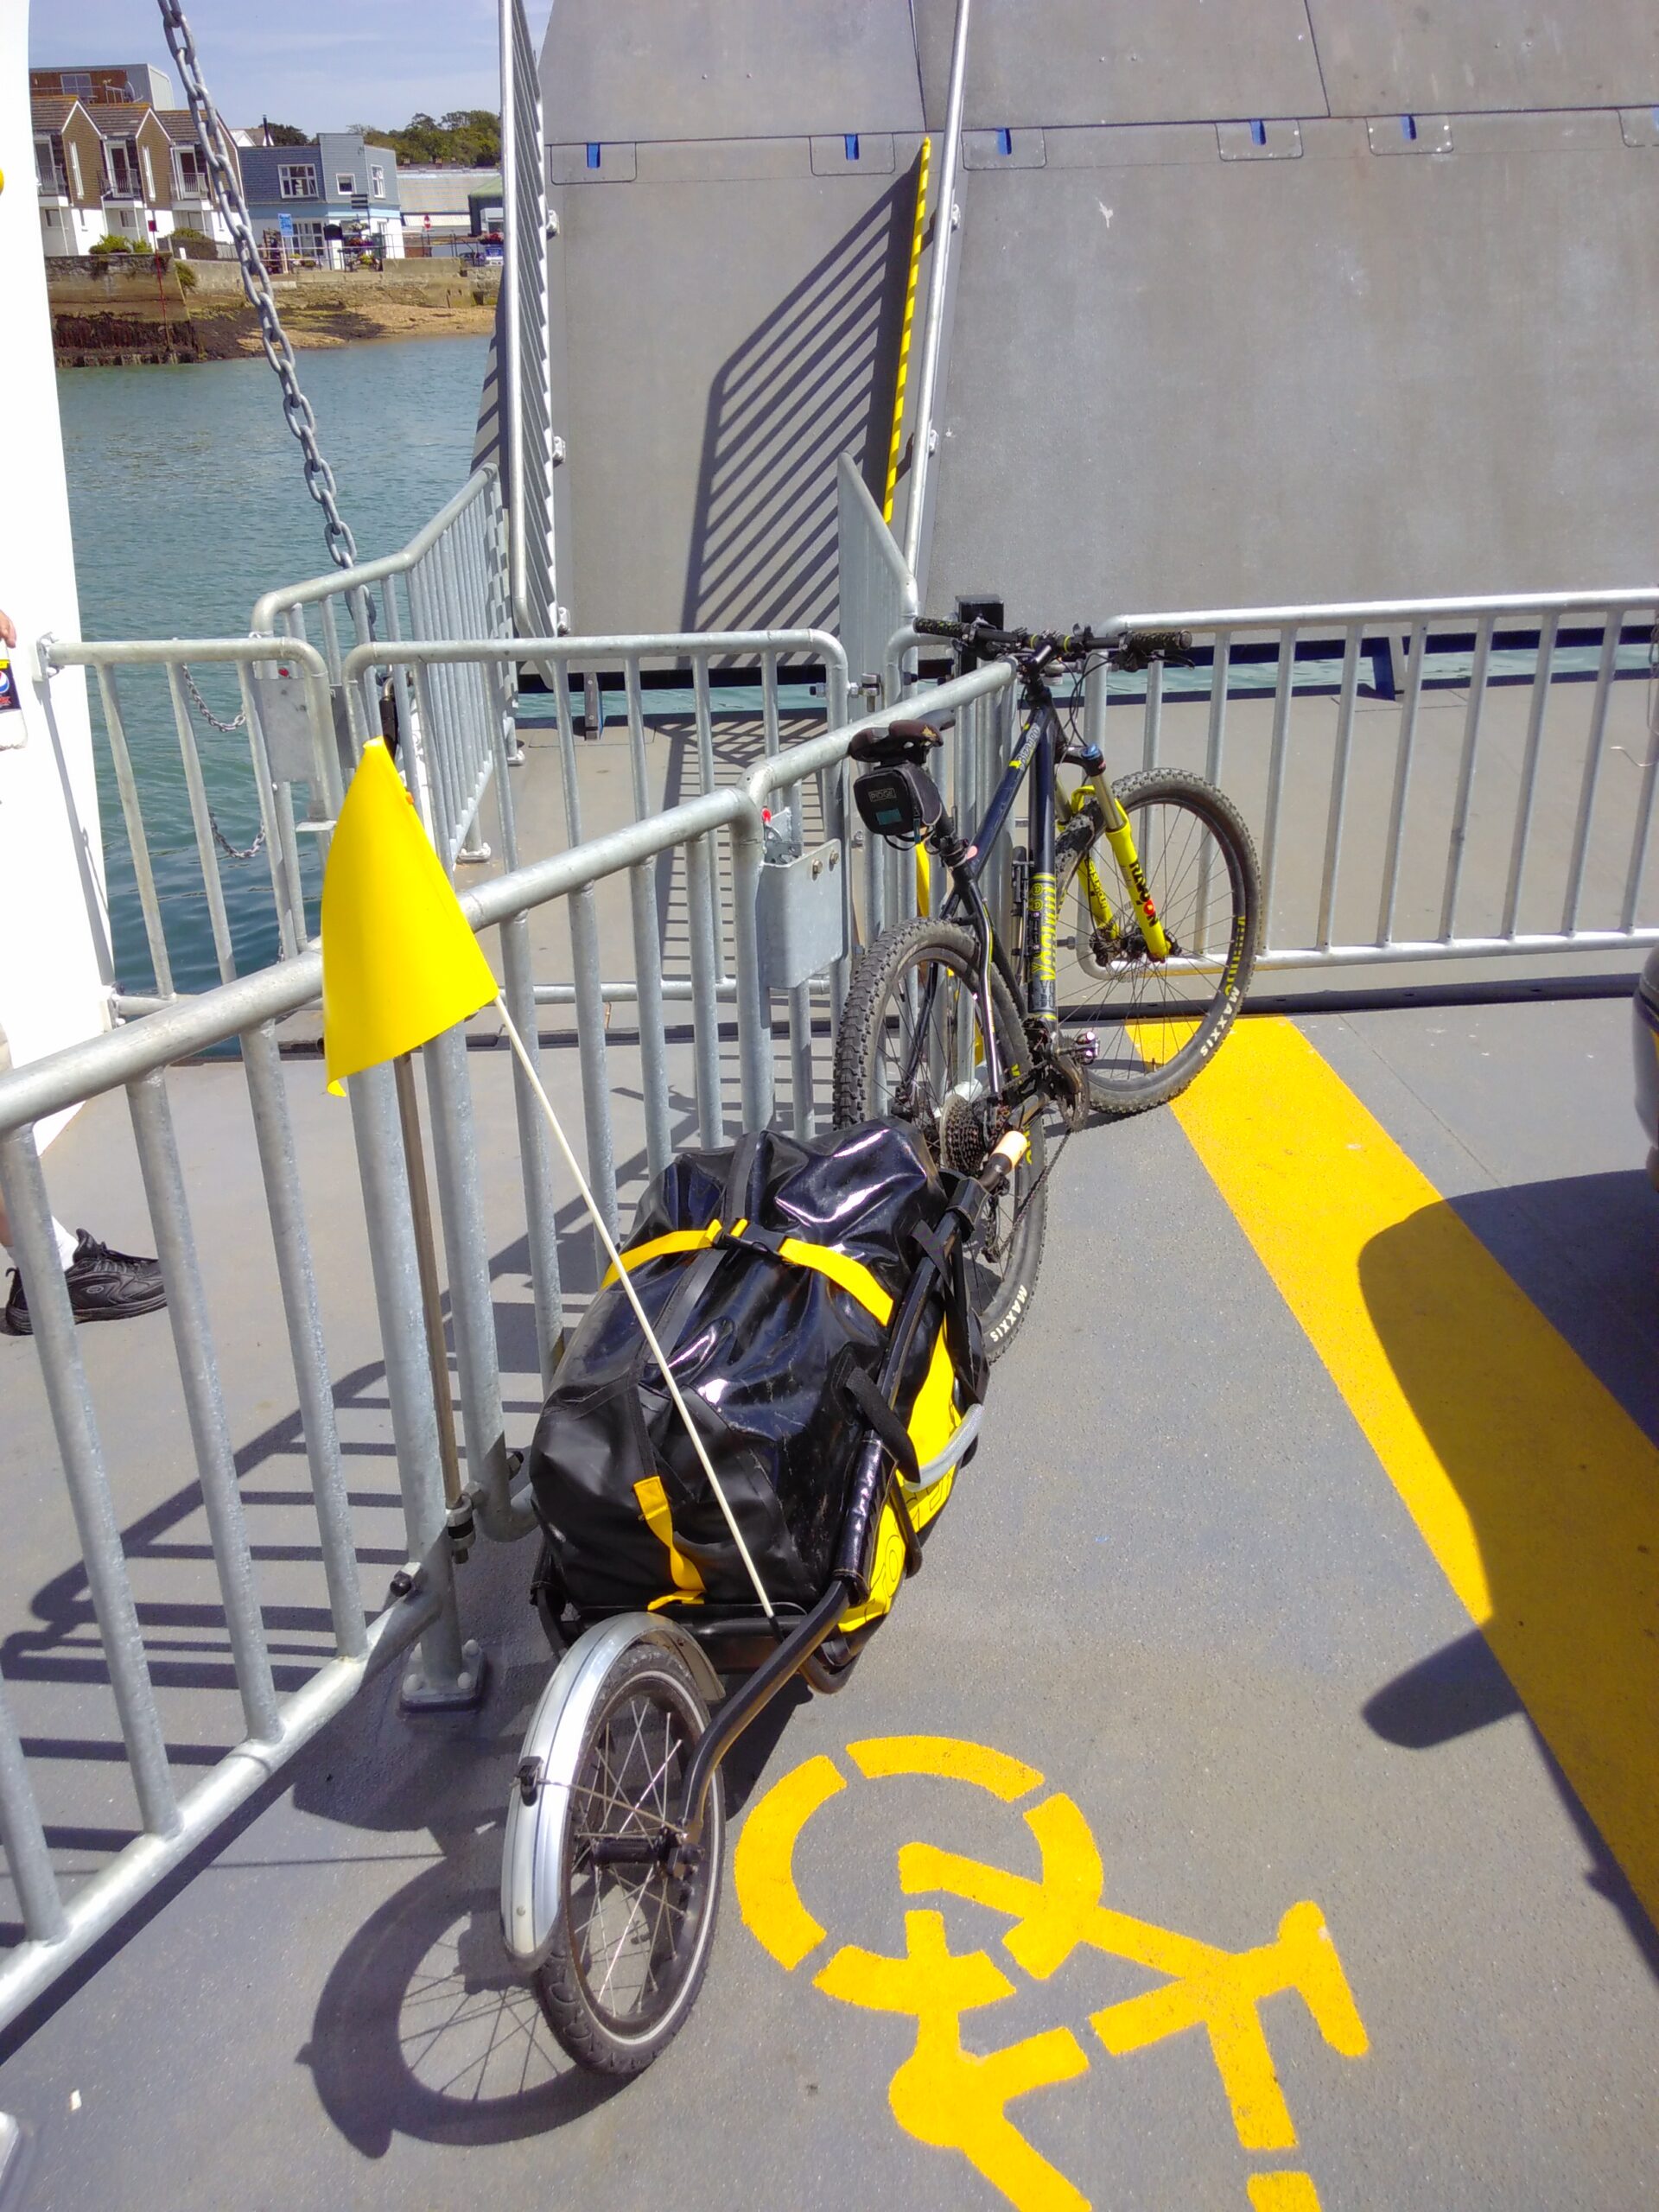 Abicycle with a trailer attached leans on railings aboard a small ferry.